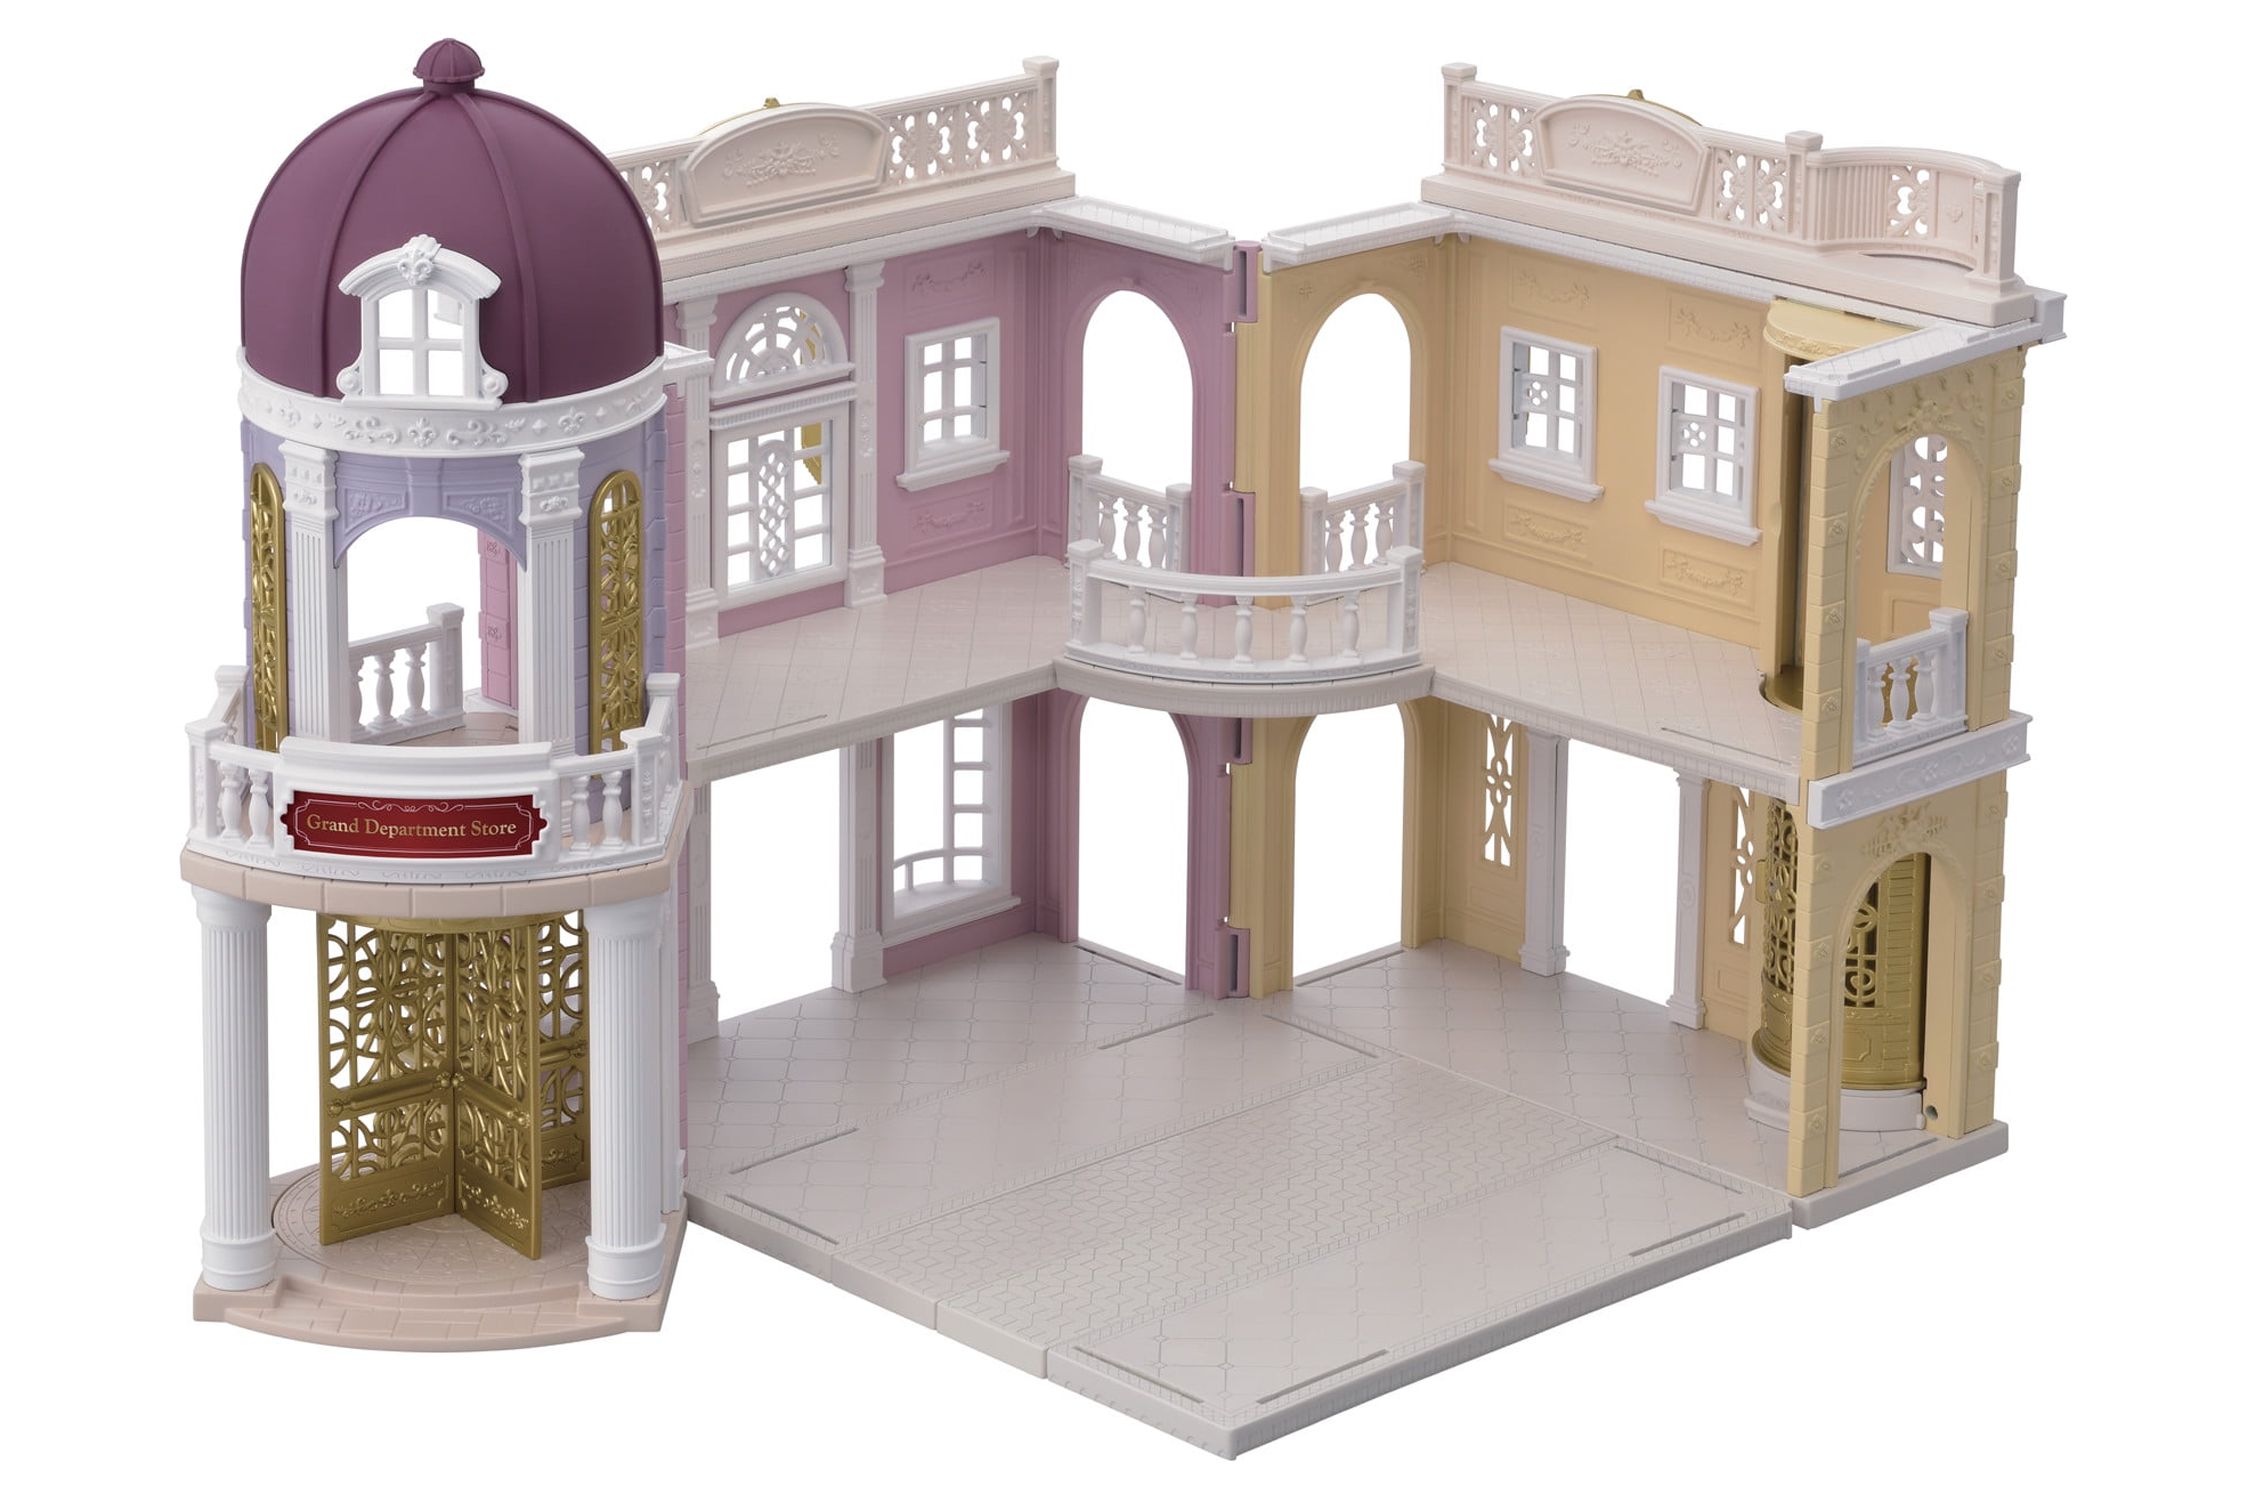 Calico Critters Town Series Grand Department Store, Fashion Dollhouse Playset with Revolving Door and Manual Elevator - image 1 of 3